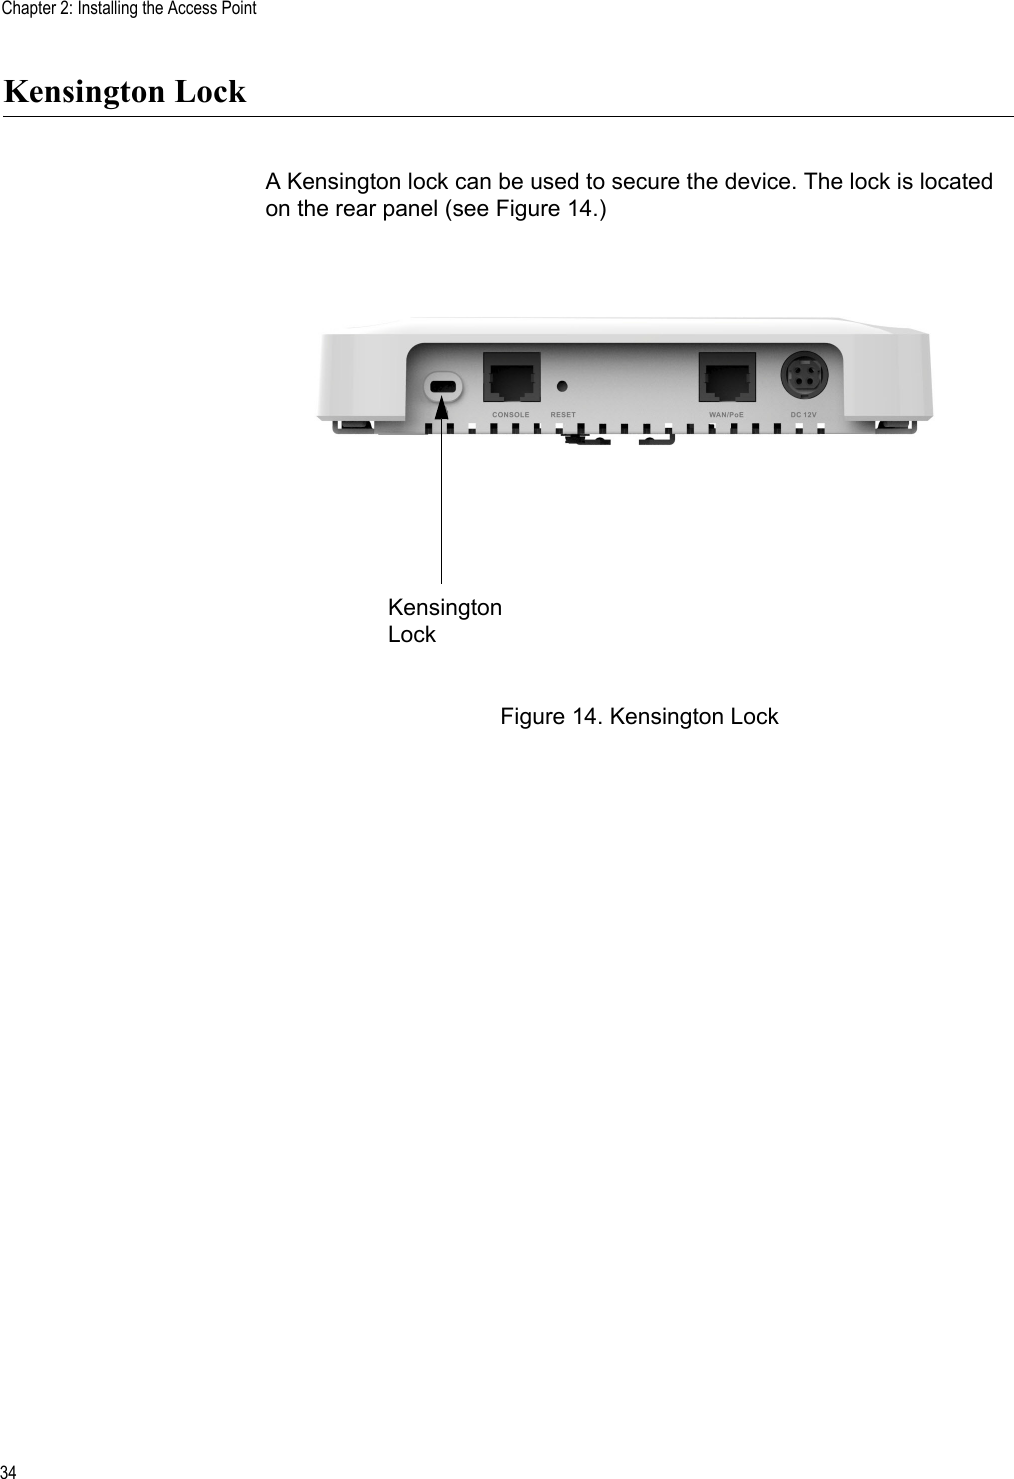 Chapter 2: Installing the Access Point34Kensington LockA Kensington lock can be used to secure the device. The lock is located on the rear panel (see Figure 14.)Figure 14. Kensington LockKensington Lock Review Draft 2-1-16